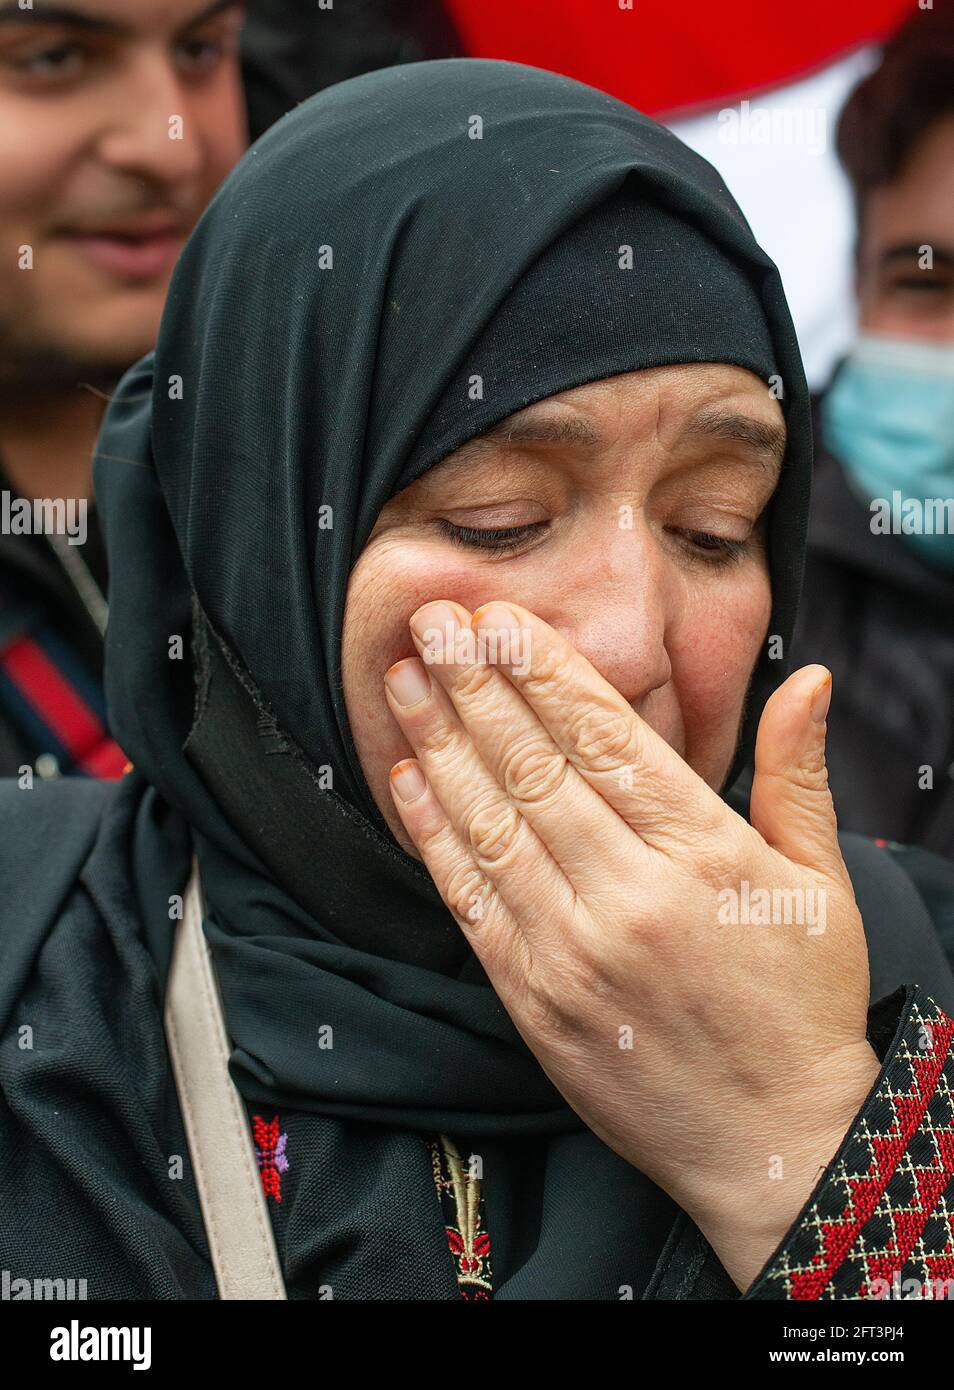 London, UK. 15th May 2021. Crying Palestinian woman protester at the Save Sheikh Jarrah rally for a Free Palestine, urging the UK government to take immediate action and stop allowing Israel to act with impunity. Stock Photo